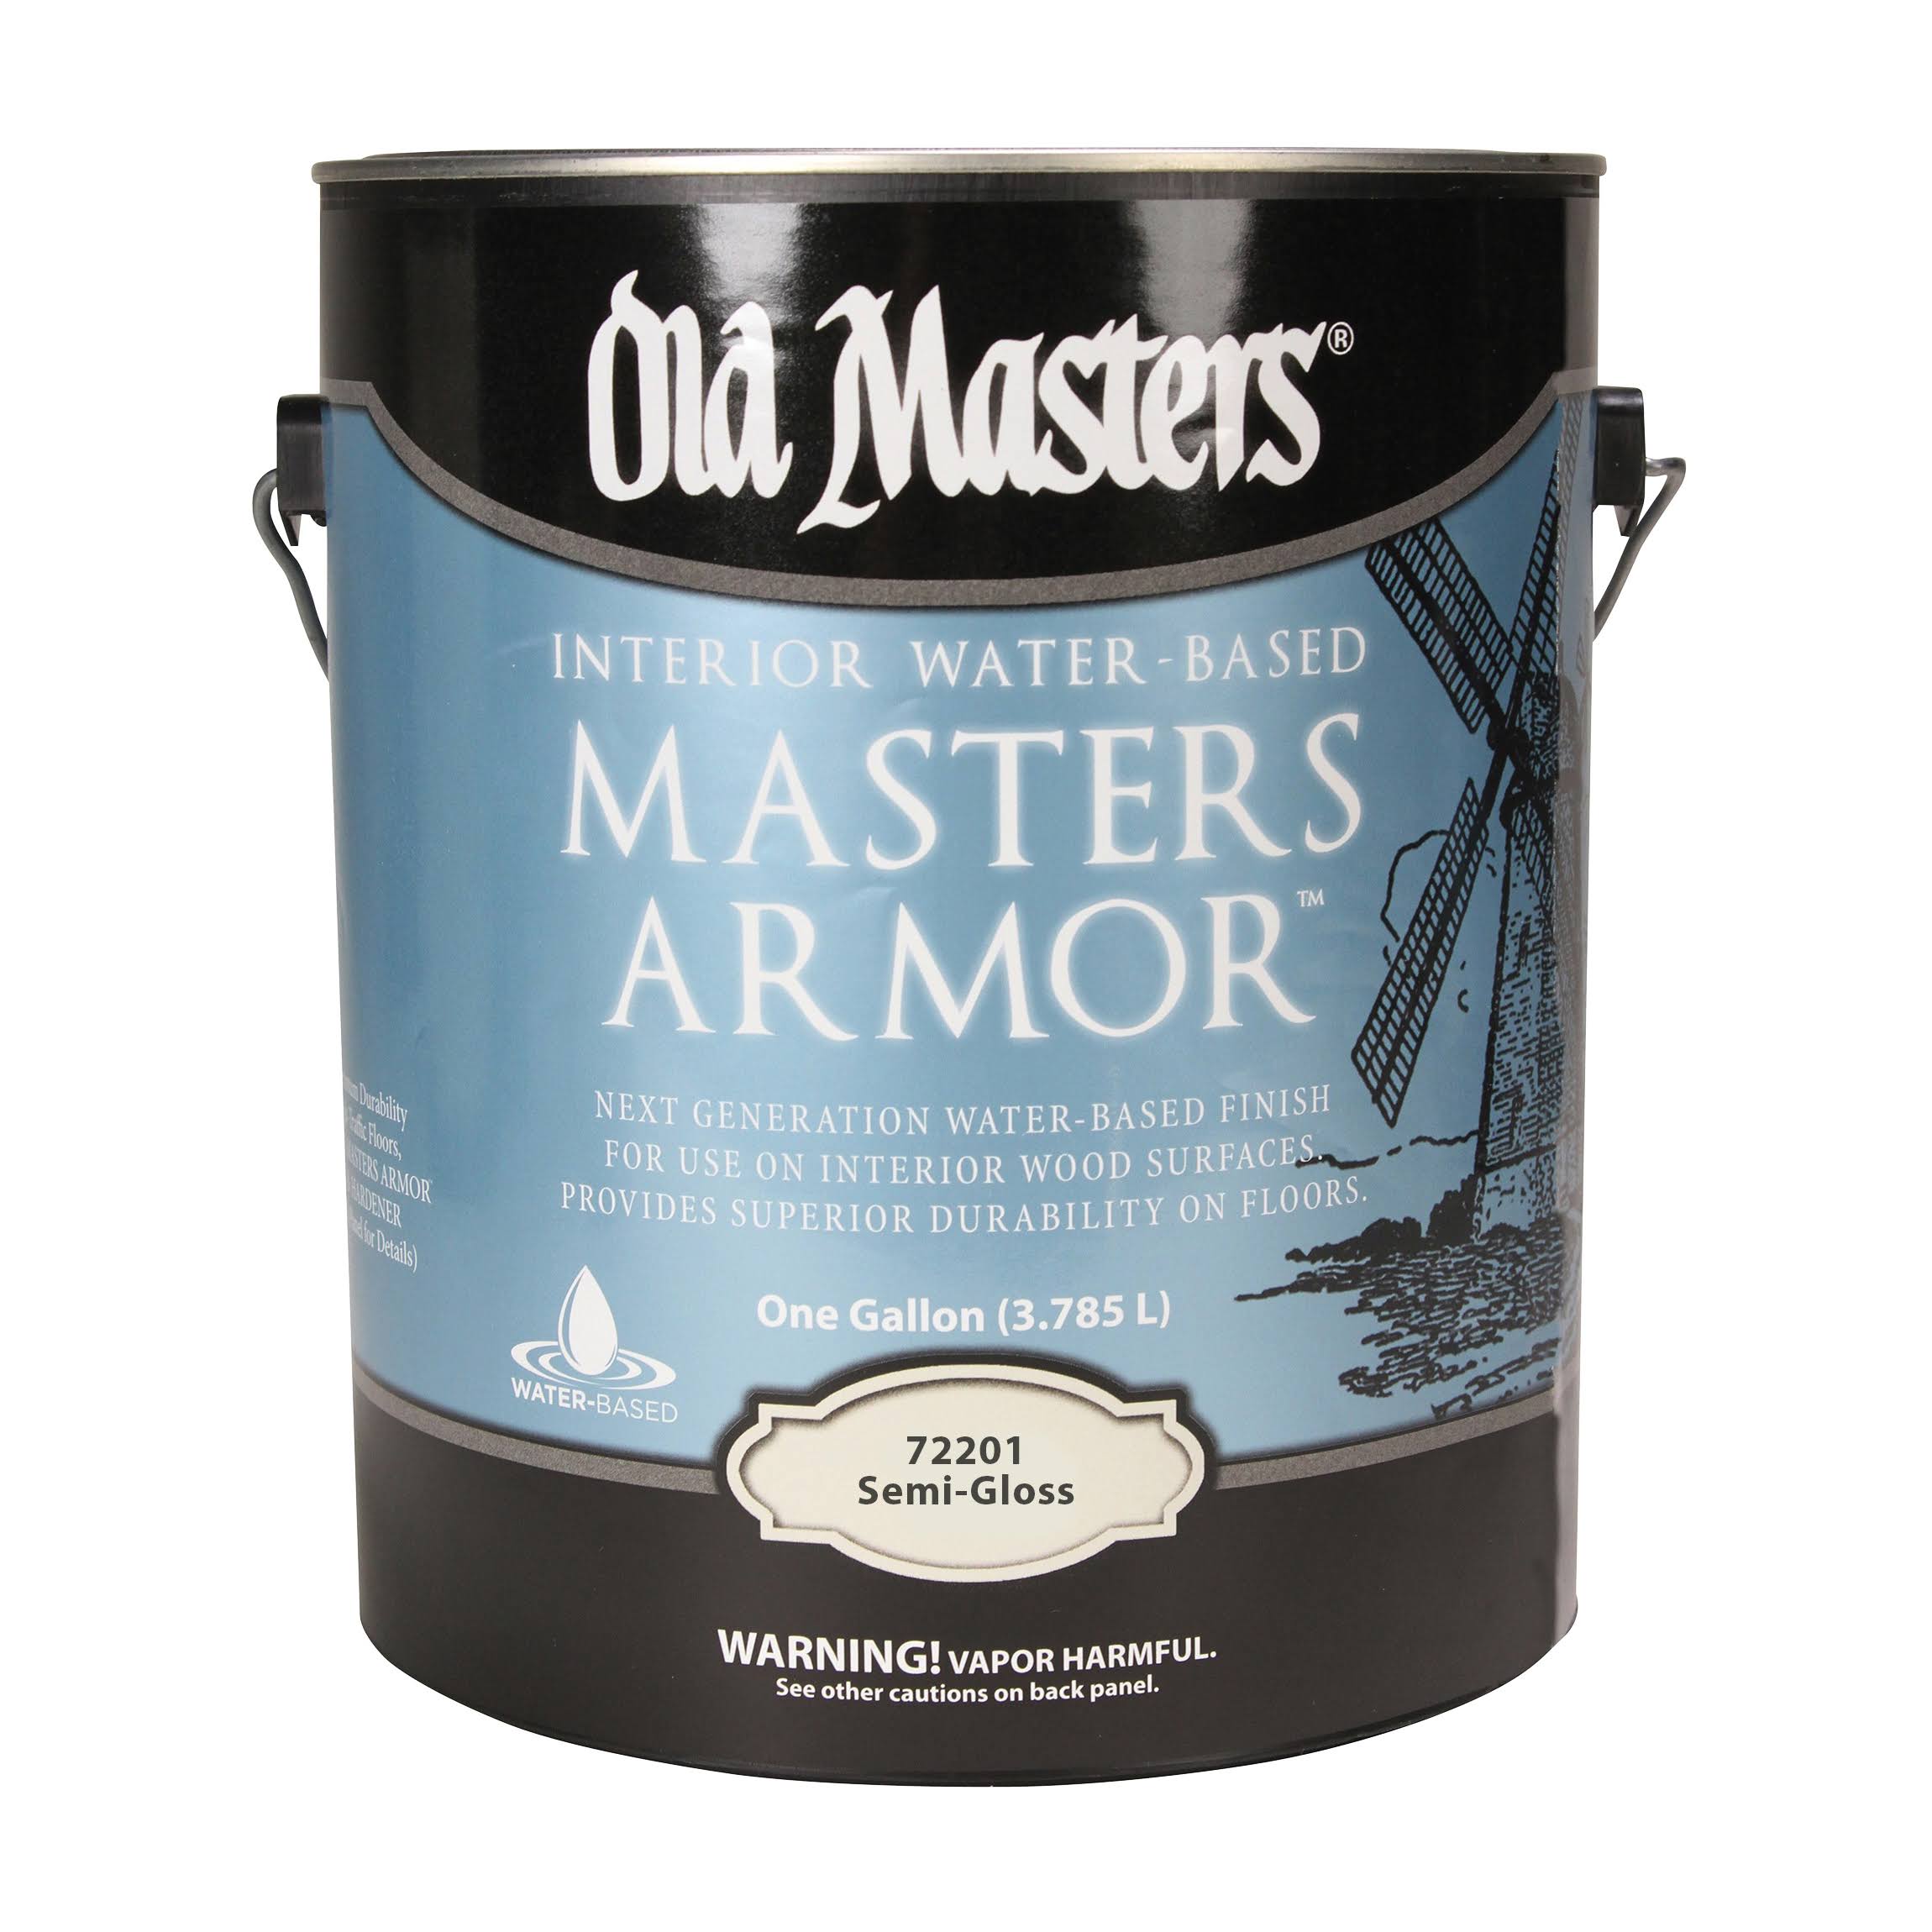 Old Masters 72201 Wood Stain, Semi-Gloss, 1 Gal 2 Pack